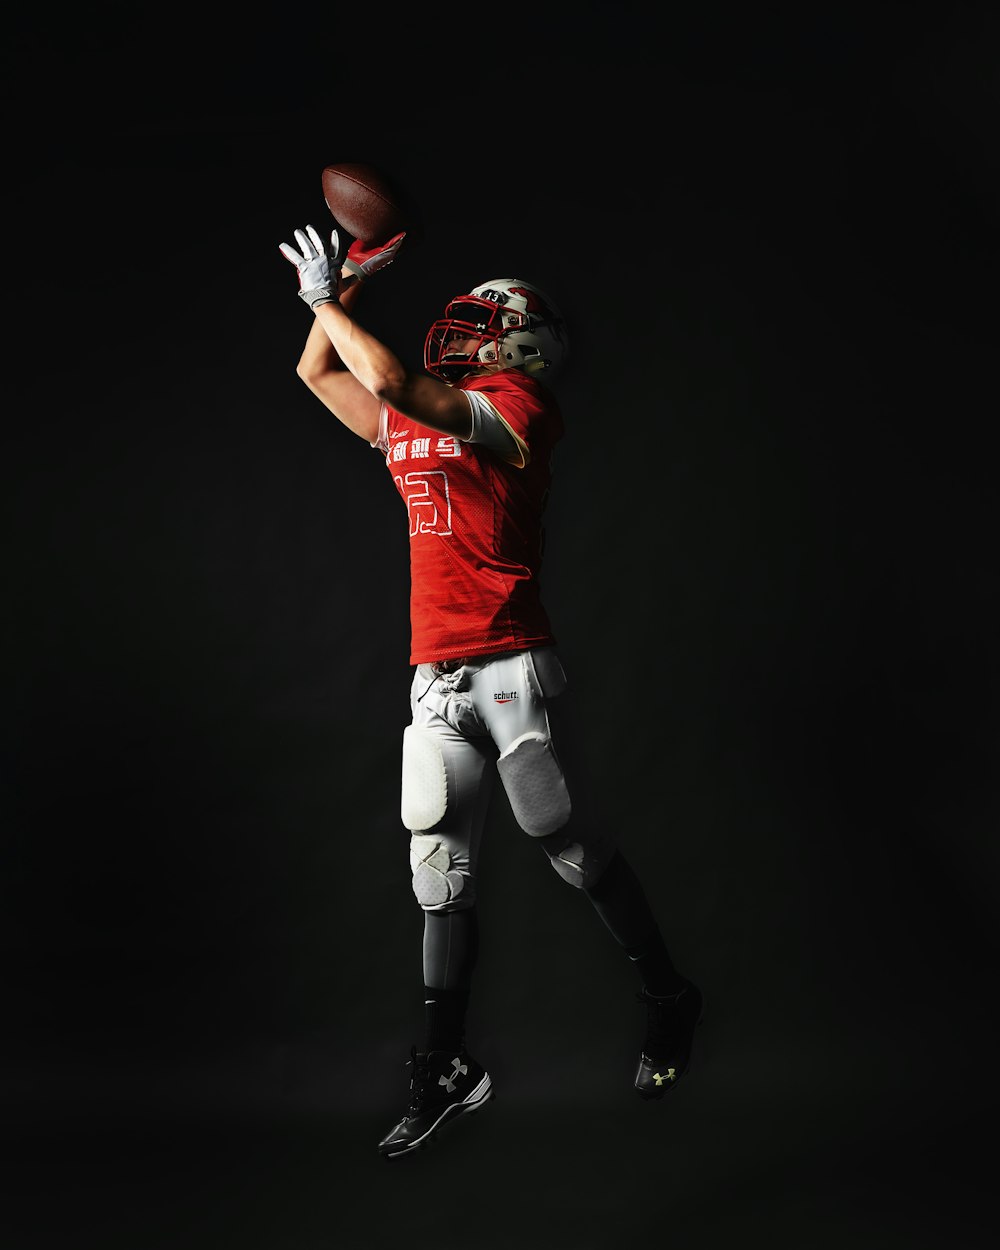 a football player is jumping in the air to catch a ball